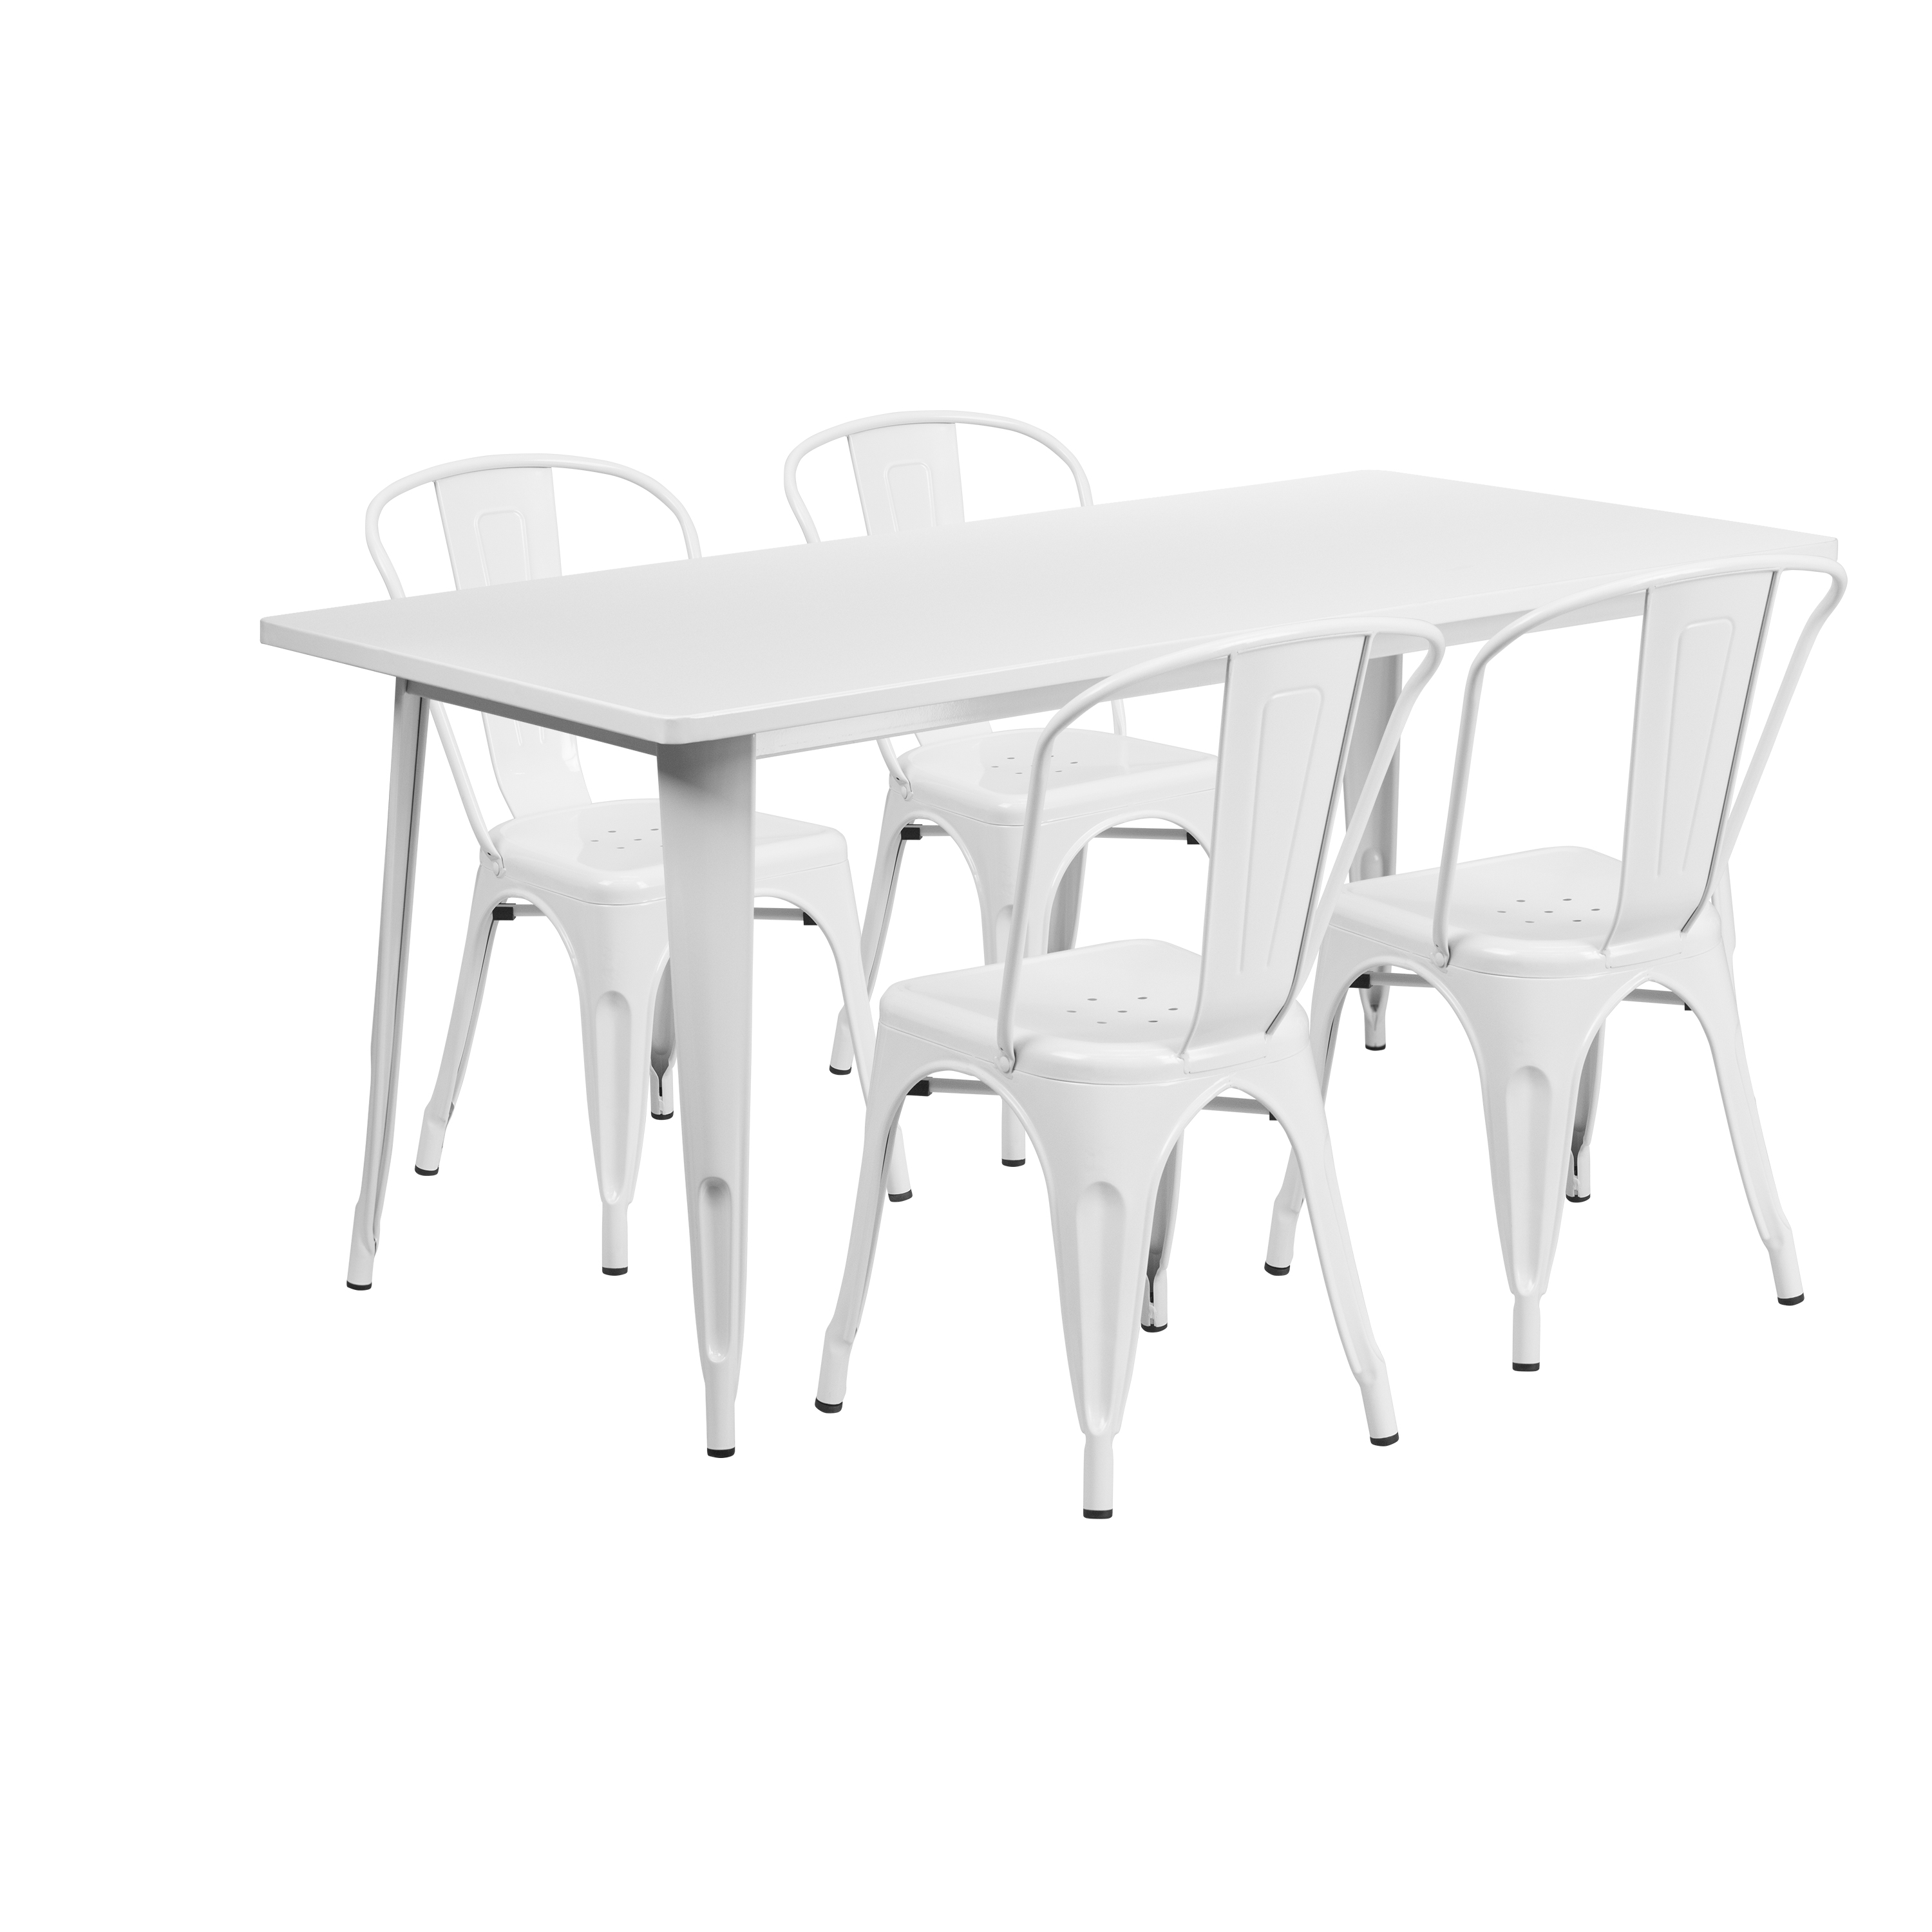 Flash Furniture Commercial Grade 31.5" x 63" Rectangular White Metal Indoor-Outdoor Table Set with 4 Stack Chairs - image 2 of 5